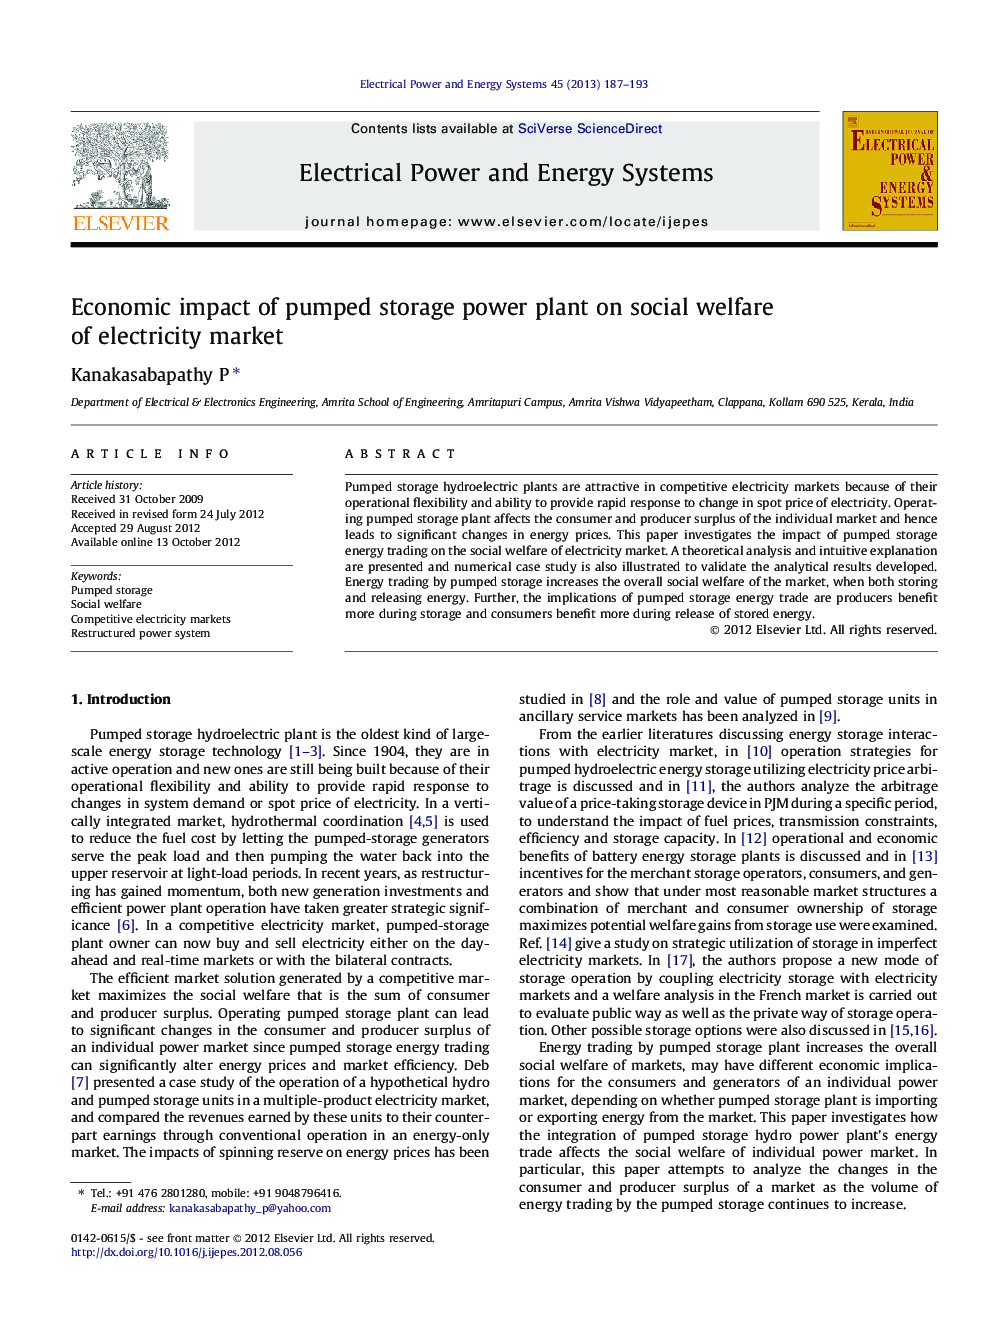 Economic impact of pumped storage power plant on social welfare of electricity market